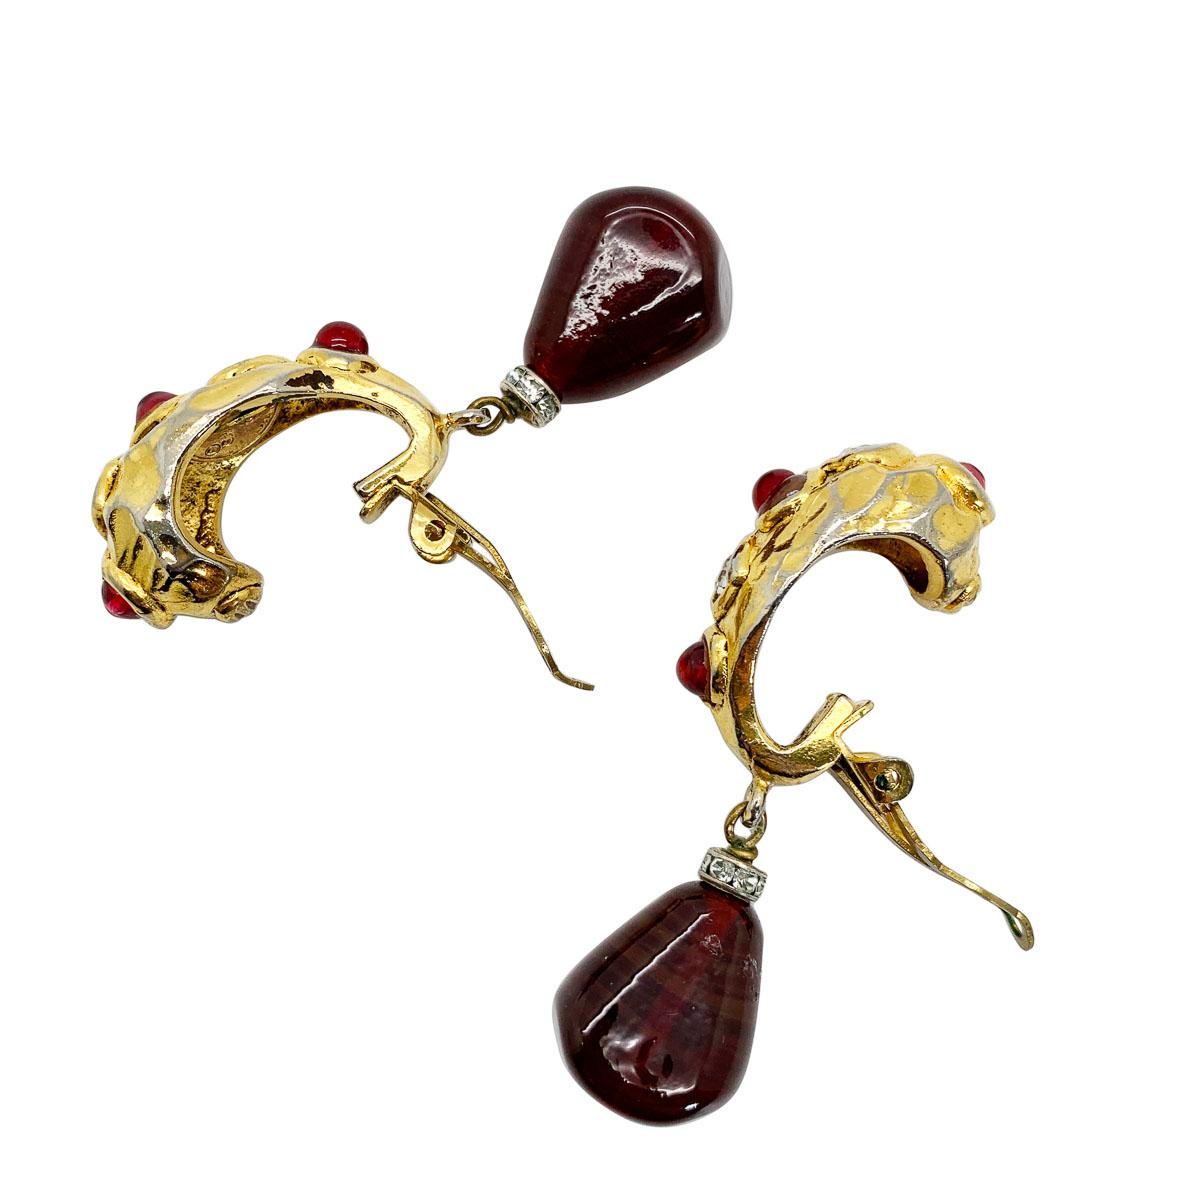 A beautiful pair of statement vintage Chanel pâte de verre earrings dating to the late 1970s, early 1980s. Featuring a huggie style clip top set with paste chatons and poured glass or pâte de verre cabochon stones. Finished with a statement pâte de